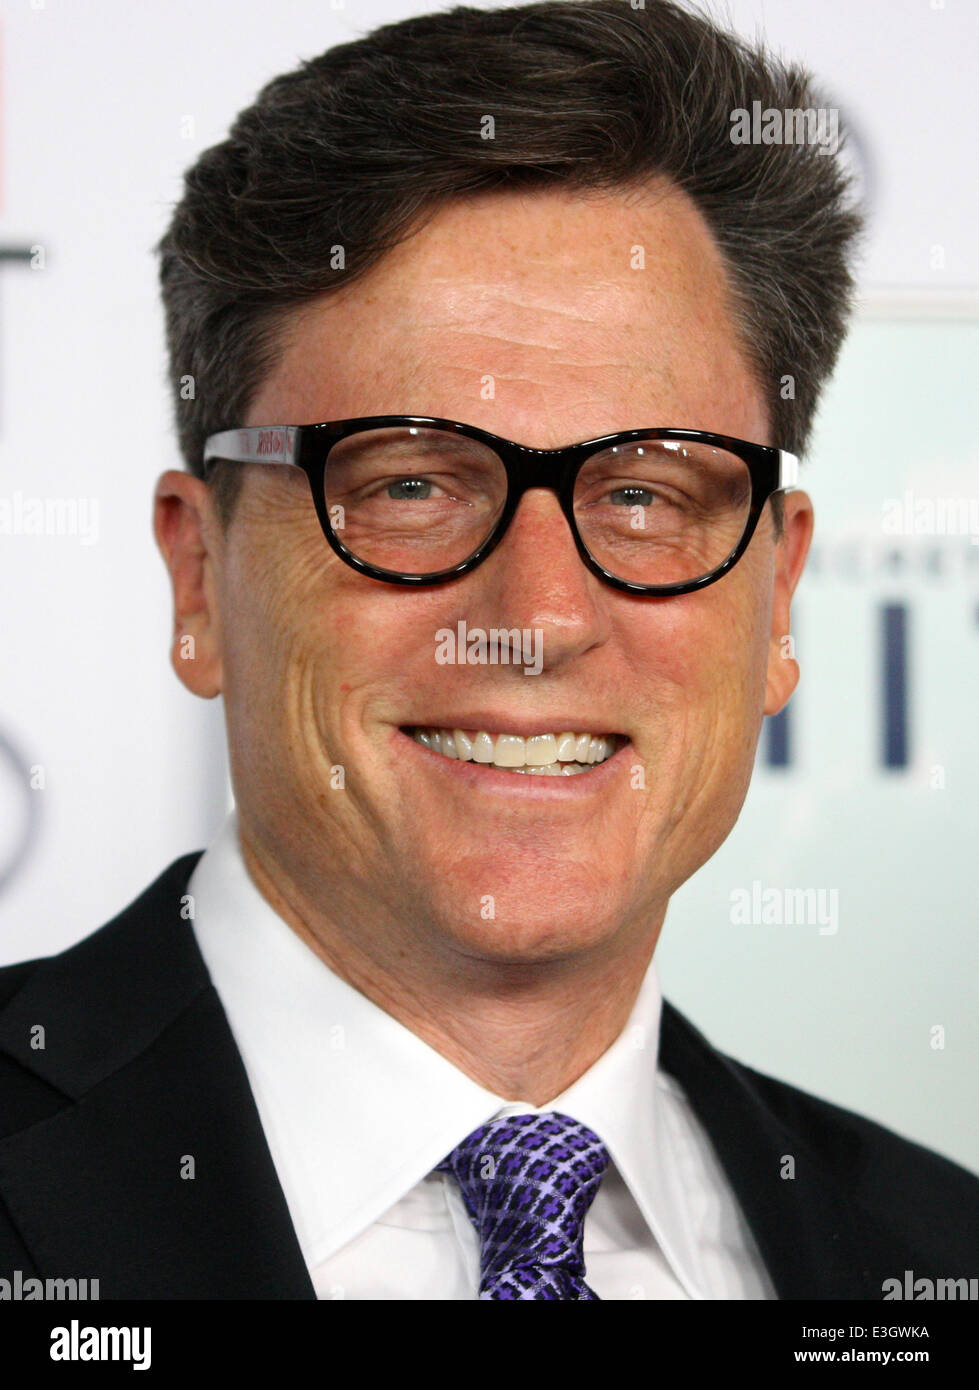 AFI FEST 2013 Presented By Audi - 'The Secret Life Of Walter Mitty' Premiere At TCL Chinese Theatre  Featuring: John Goldwyn Where: Hollywood, California, United States When: 14 Nov 2013 Stock Photo